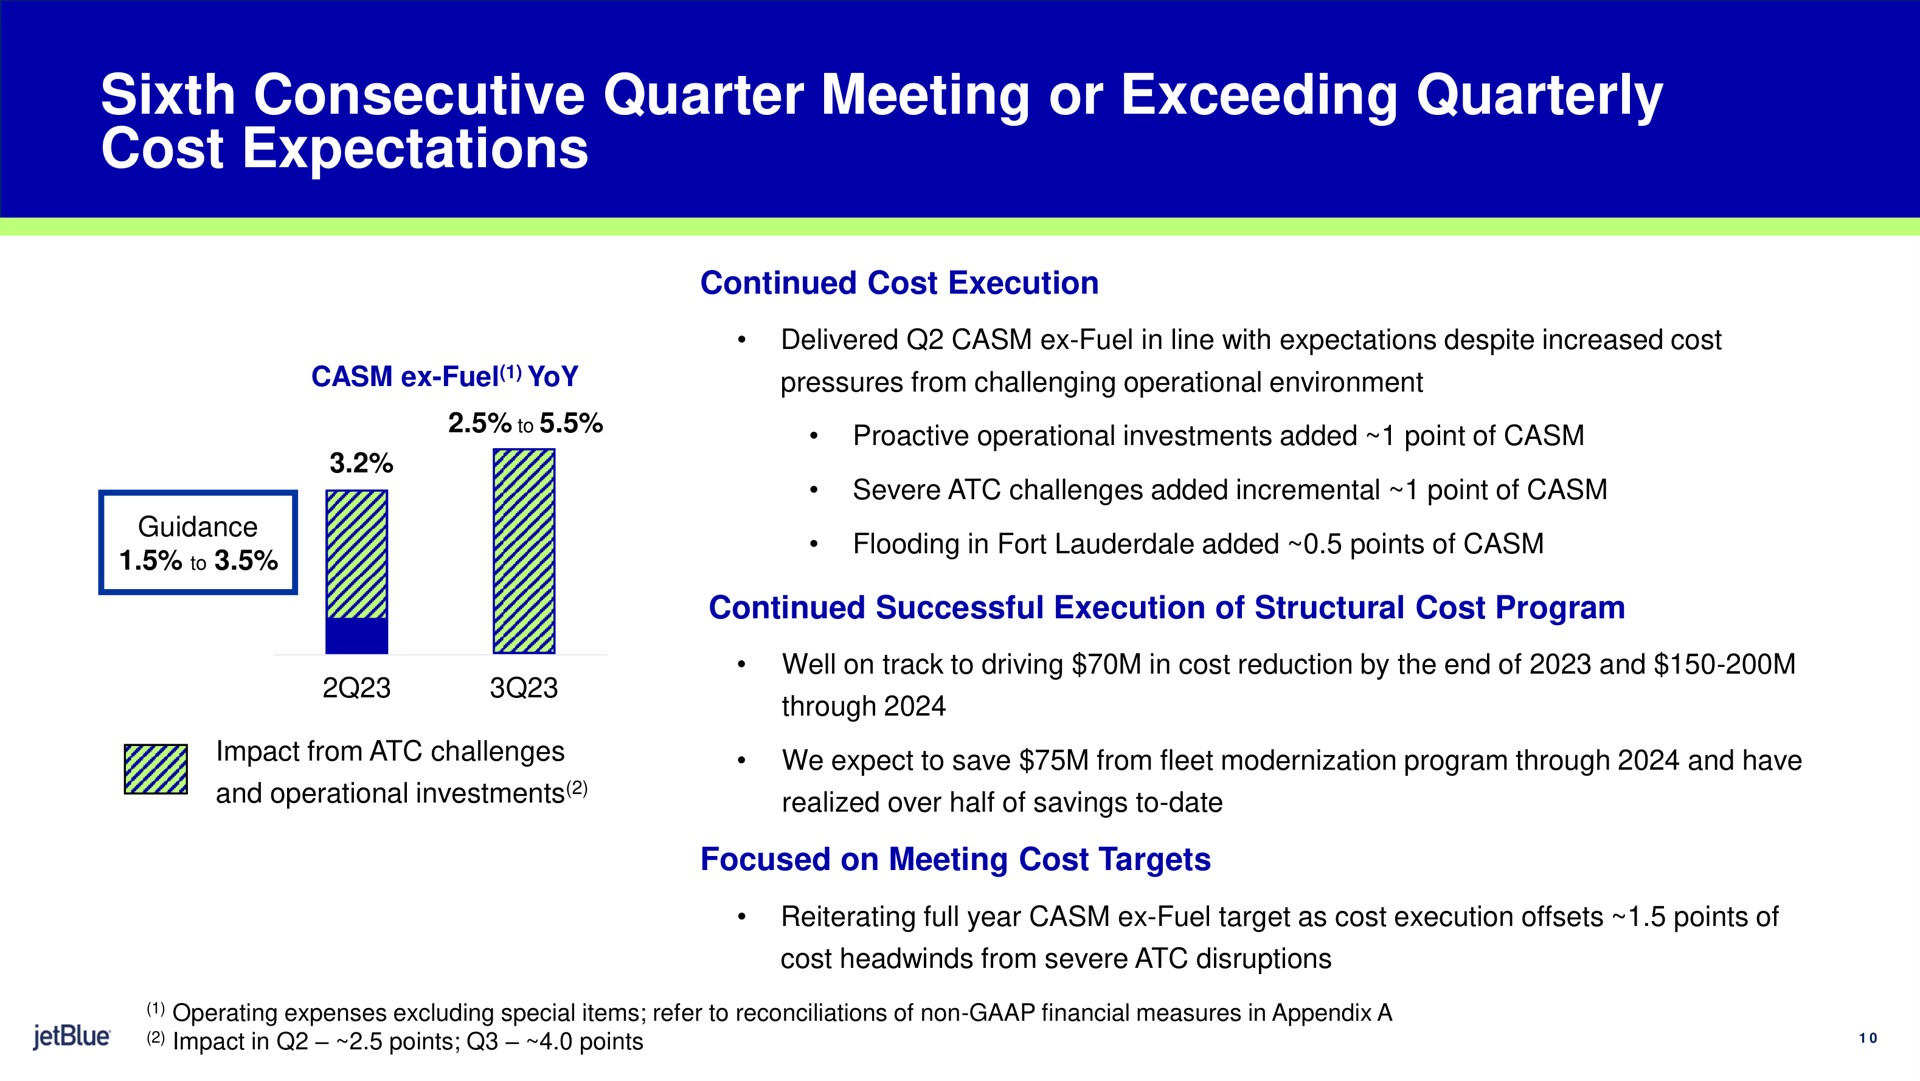 sixth consecutive quarter meeting or exceeding quarterly cost expectations continued cost execution continued successful execution of structural cost program focused on meeting cost targets | jetBlue